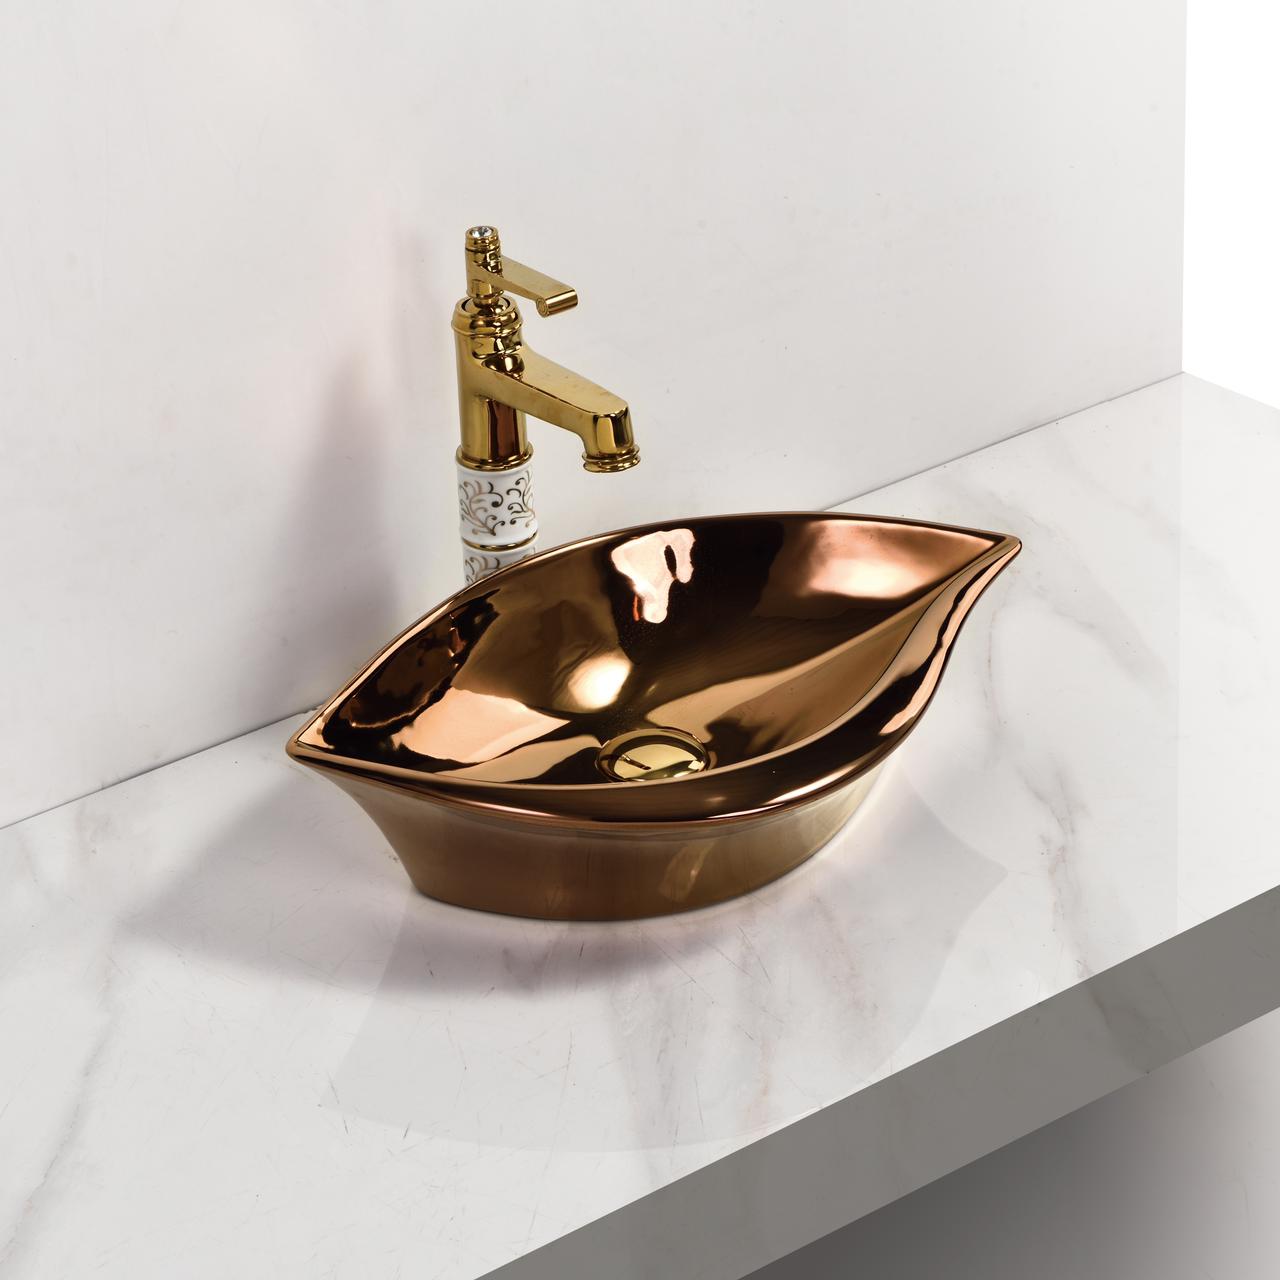 InArt Ceramic Counter or Table Top Wash Basin Rose Gold Color 50 x 32.5 CM - InArt-Studio